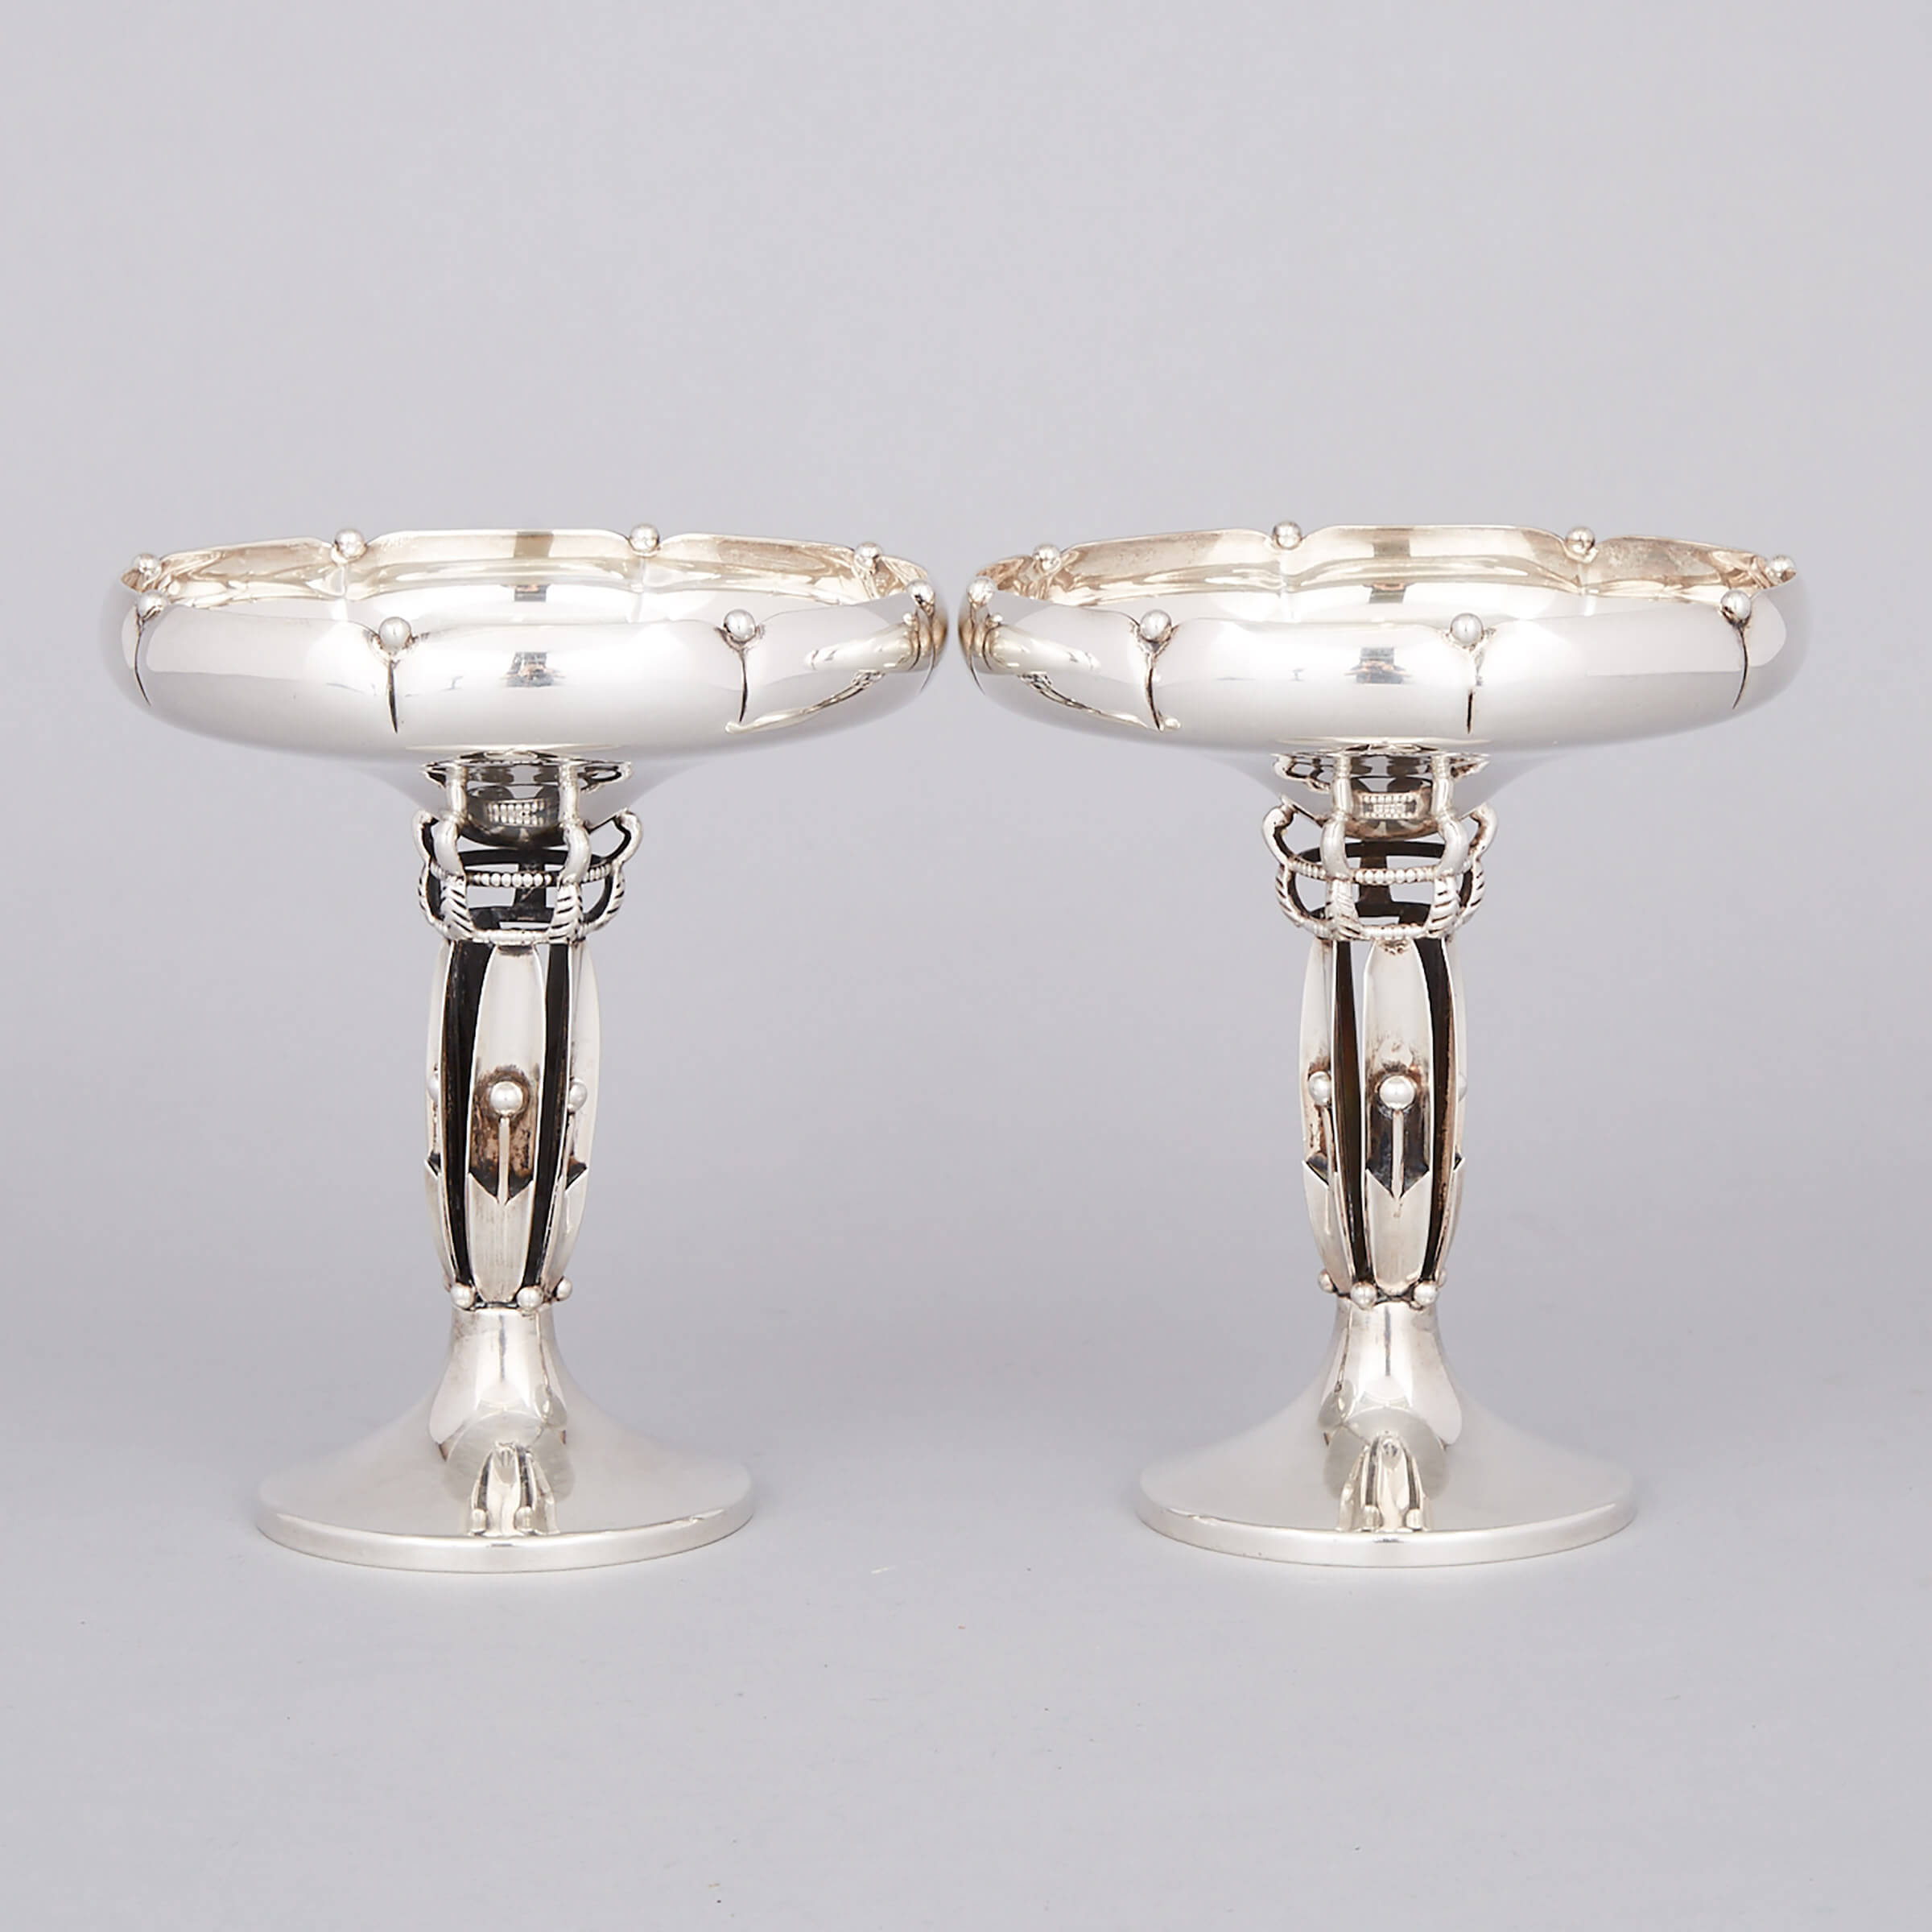 Pair of American Silver Pedestal Footed Comports, Hamilton Silver Co., New York, N.Y., mid-20th century